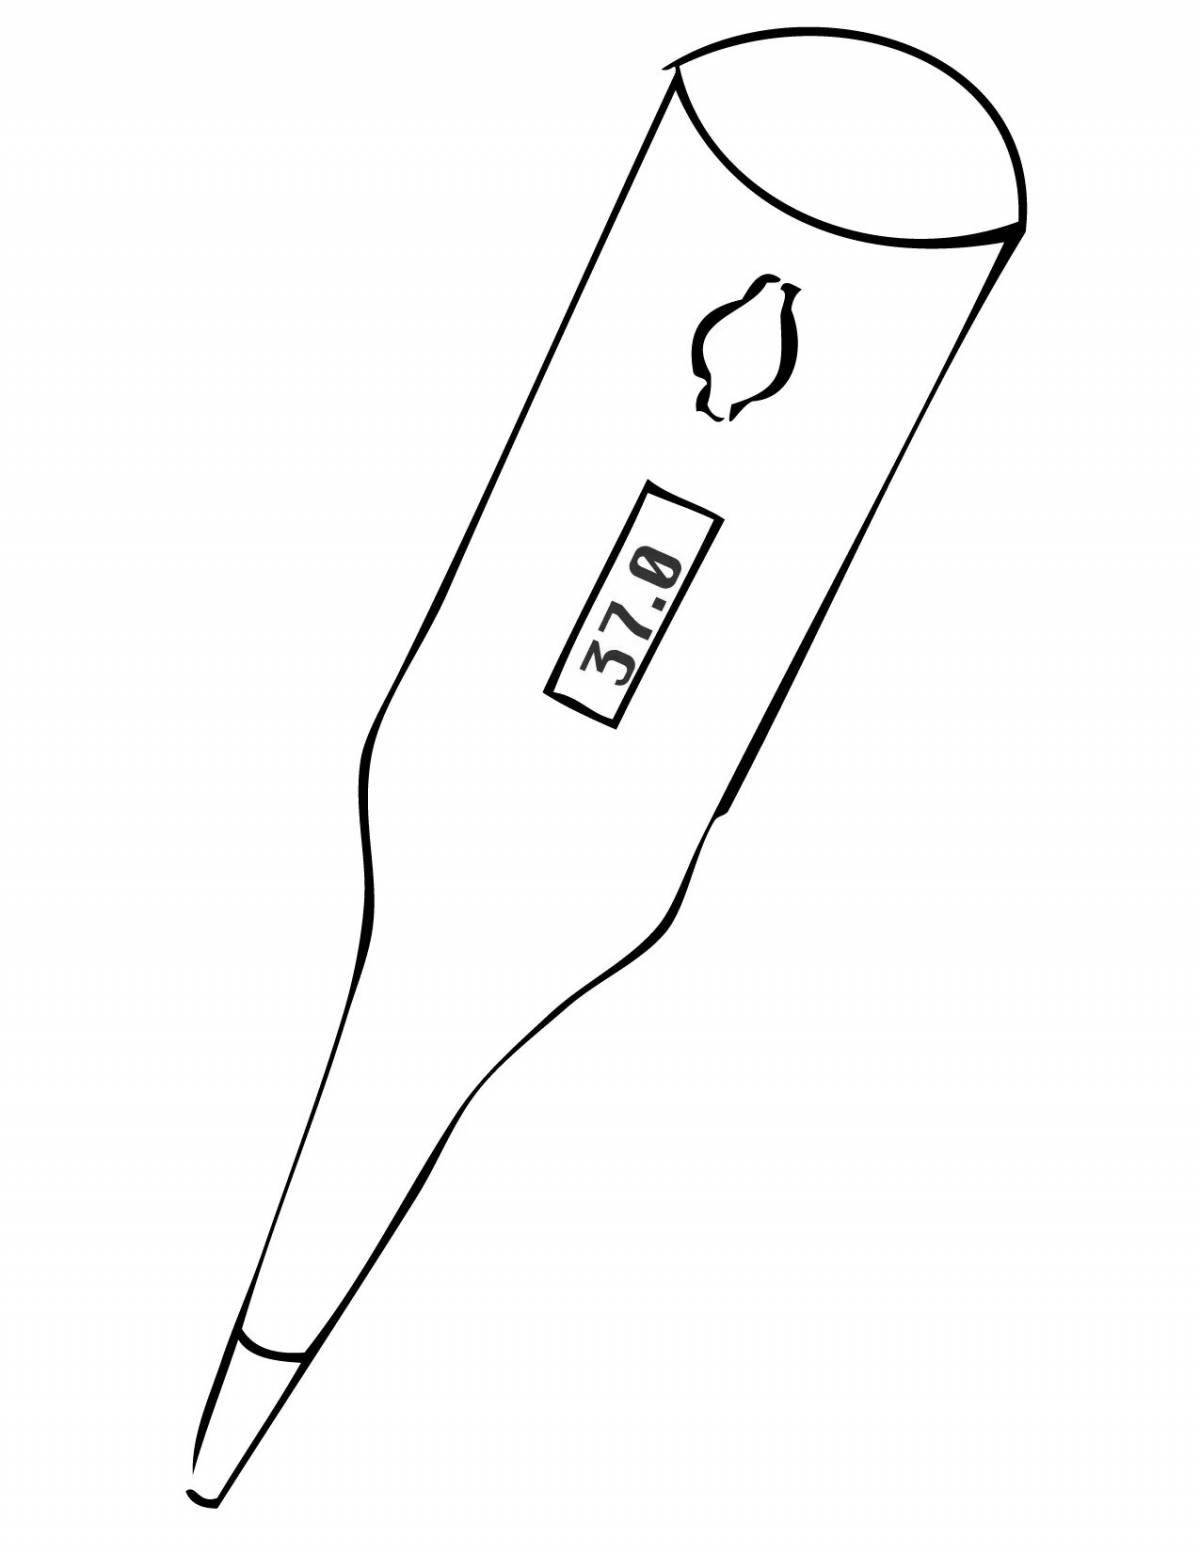 Fun thermometer coloring book for kids